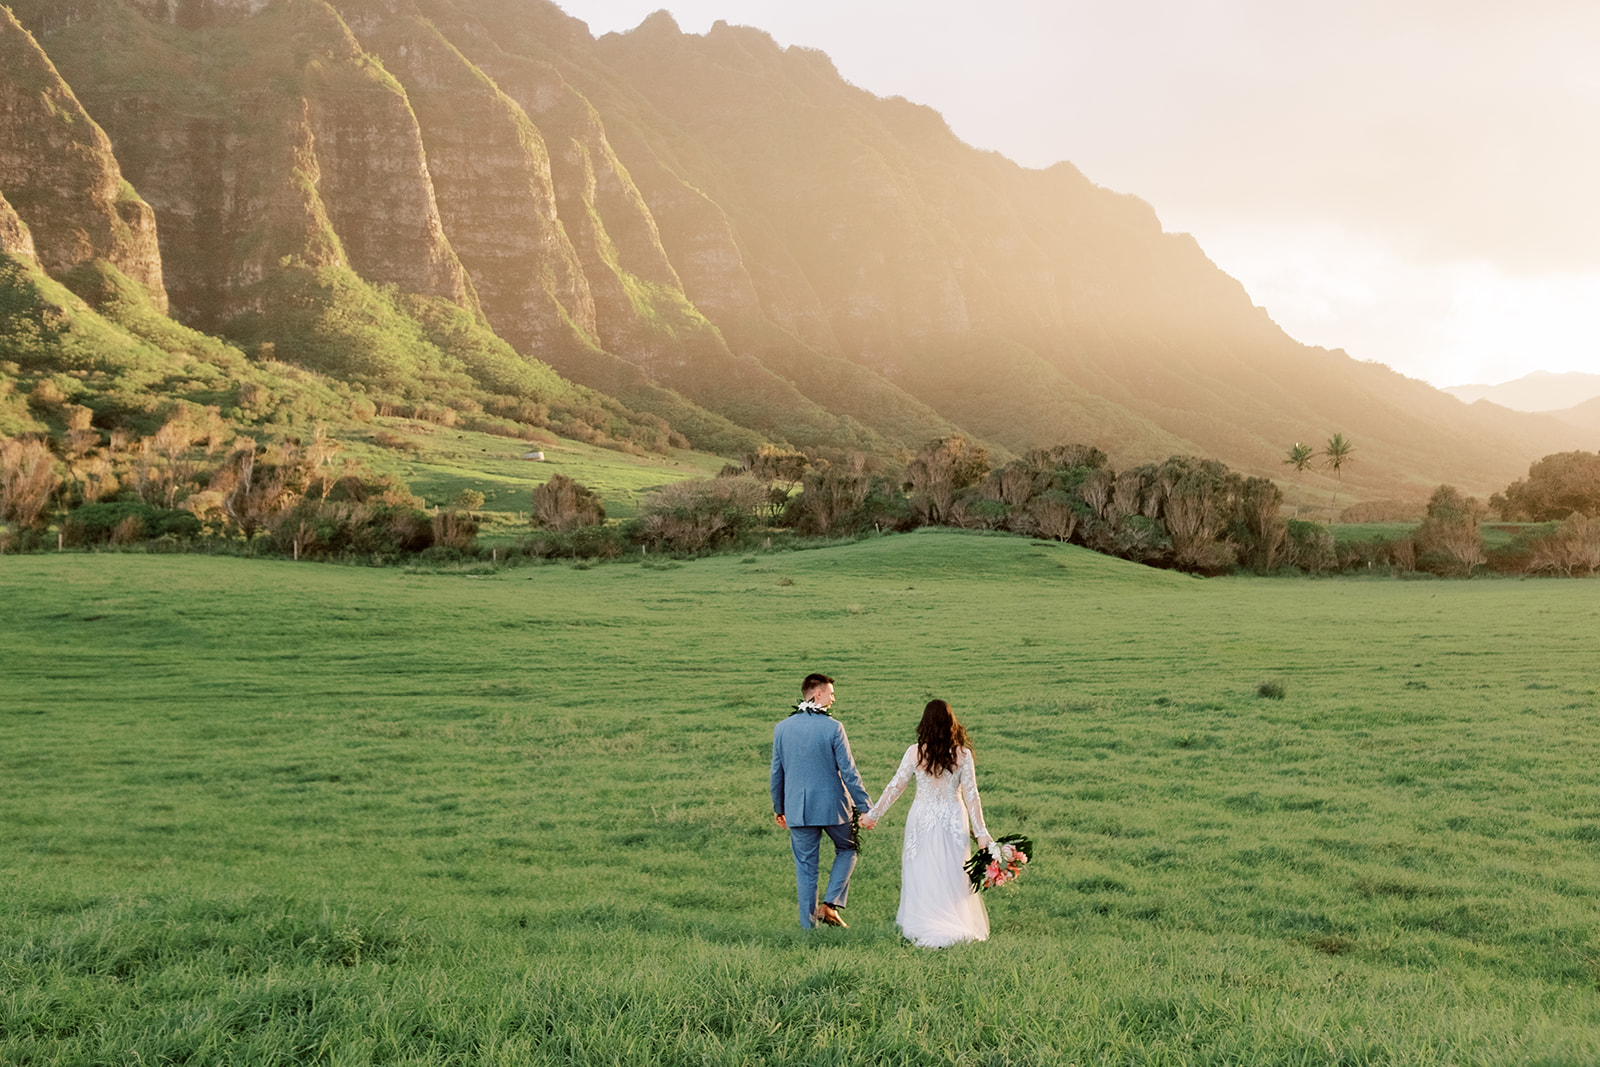 A bride and groom walking through a grassy field with the view of the mountains at sunset.